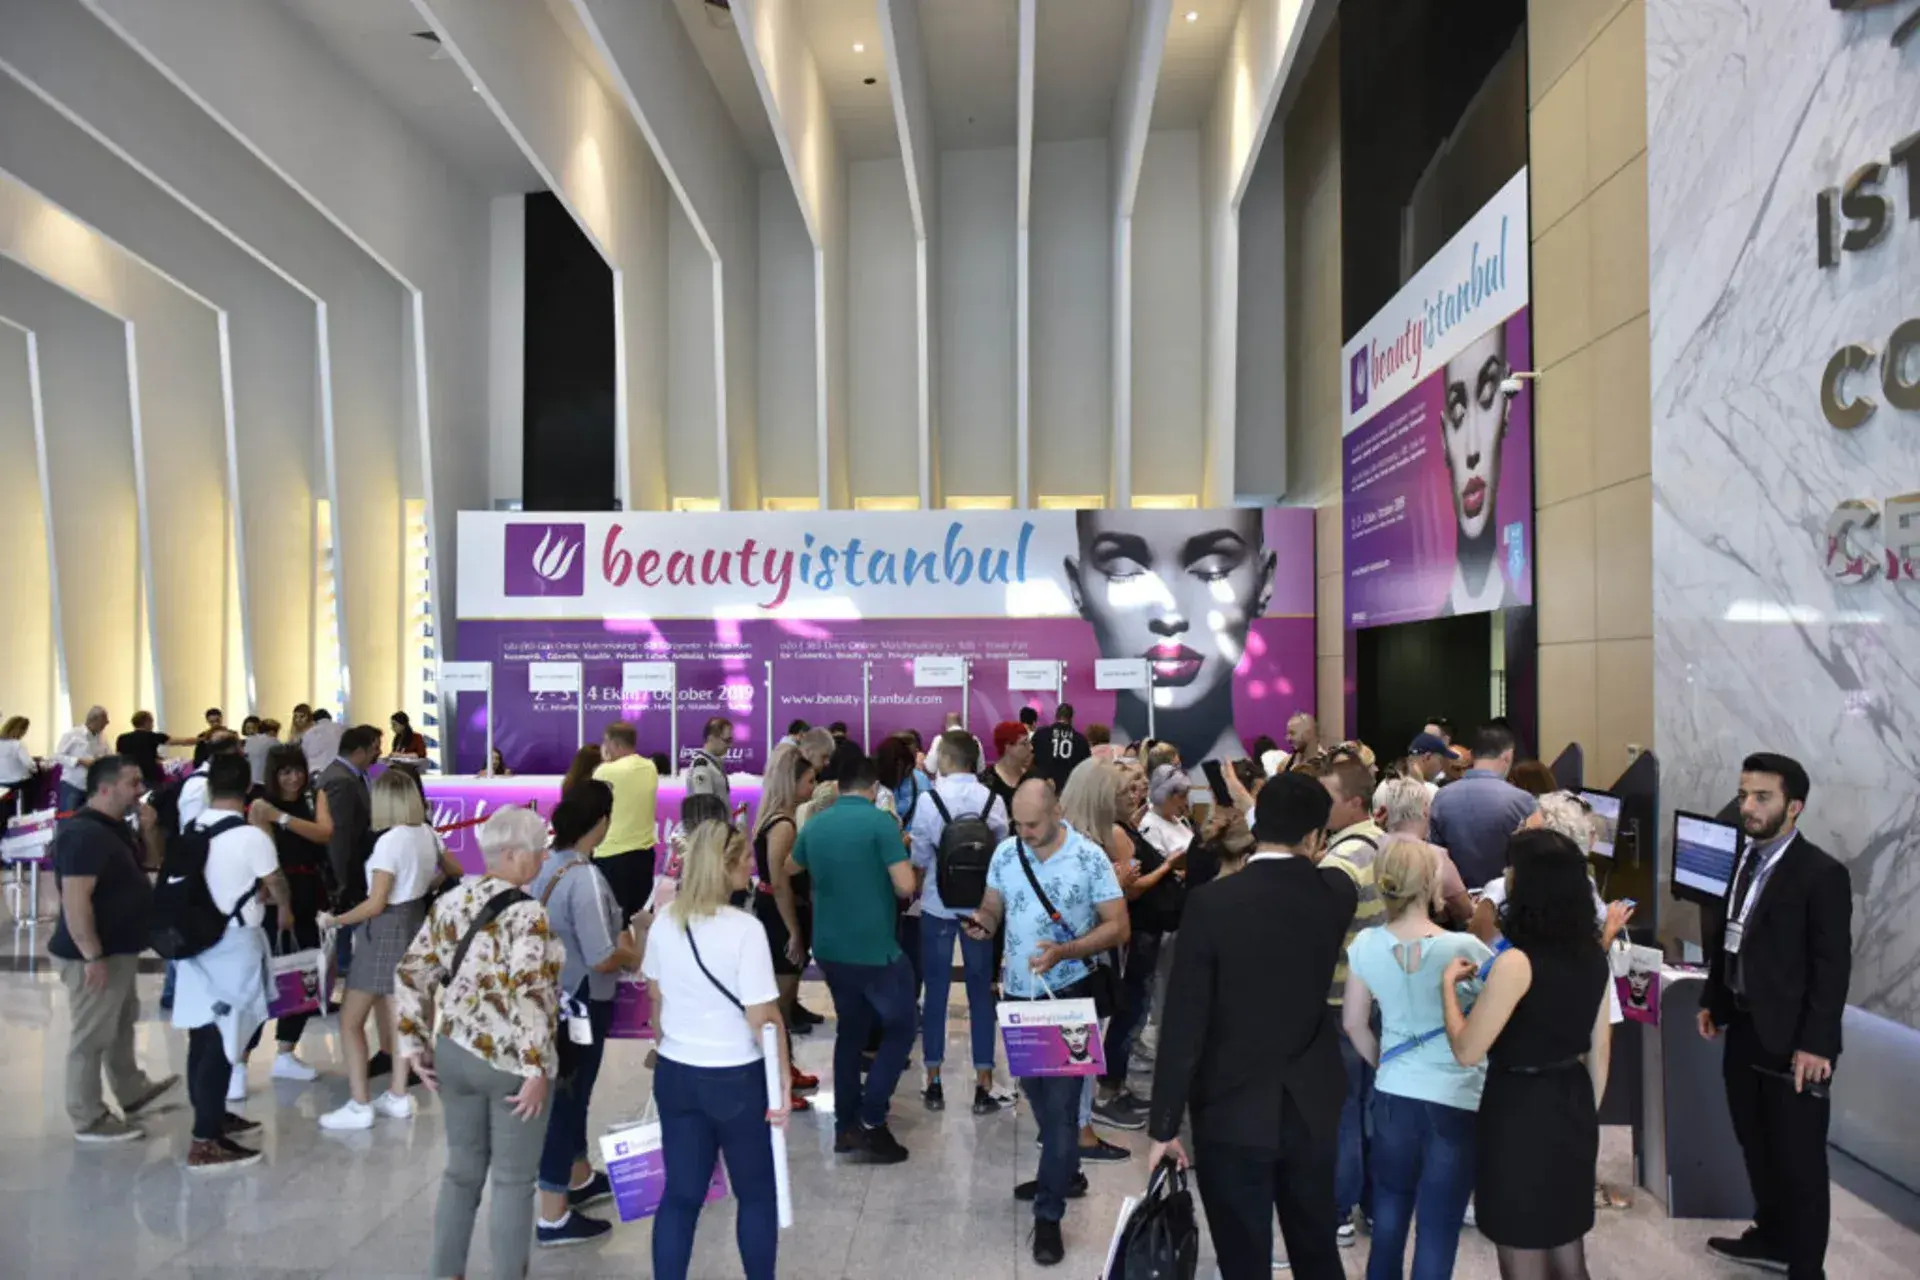 4th International Exhibition for Cosmetics, Beauty, Hair, Home Care, Private Label, Packaging and Ingredients, Photo 2138